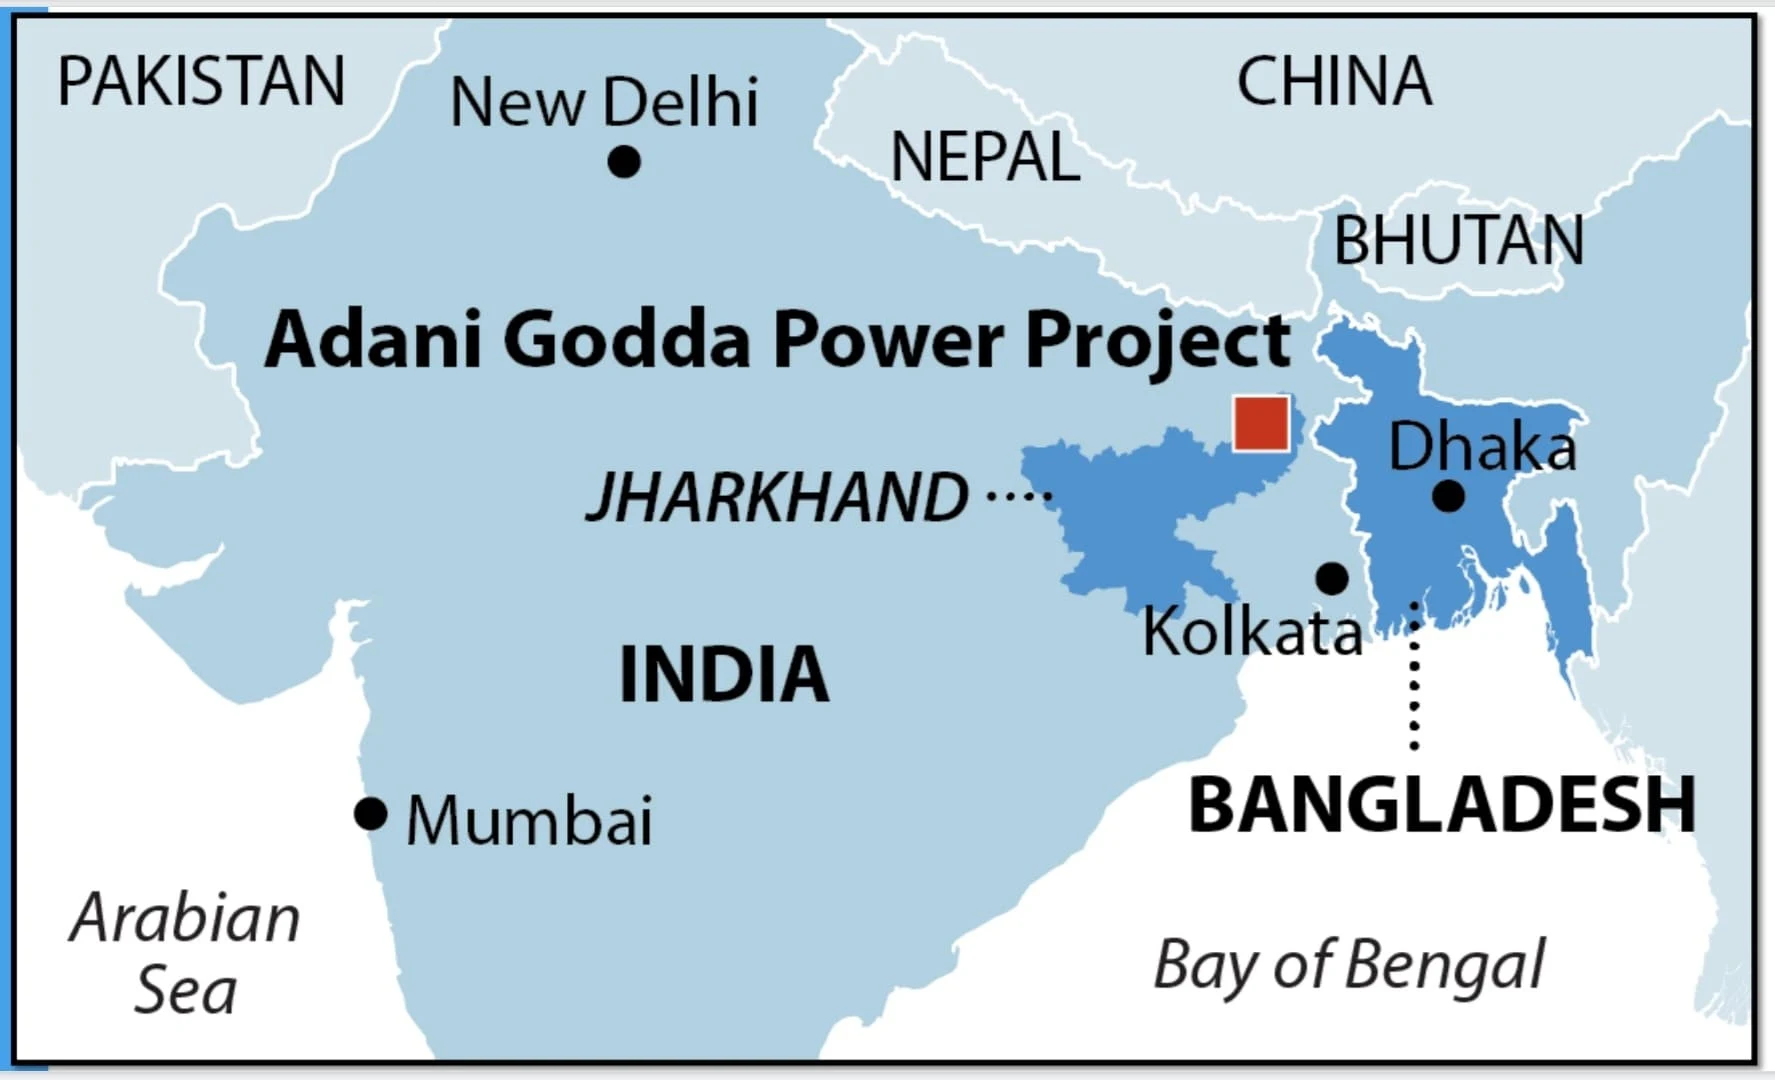 Adani to Export Electricity from India to Bangladesh   WHAT HAS HAPPENED?  Tycoon Gautam Adani plans to start exporting electricity from a coal-fired plant in eastern India to Bangladesh before the end of the year, helping to alleviate energy shortages in the South Asian nation.    Adani Power Ltd. will commission a 1.6 gigawatt facility in Jharkhand state and a dedicated transmission line for the exports by Dec. 16.  The project underscores India's push to use infrastructure as part of its diplomatic outreach to neighbors.    Adani -- Asia's richest person controlling a business empire spanning ports, infrastructure and energy -- is also involved in investments in Sri Lanka.    BUT WHY BANGLADESH NEEDS POWER FROM INDIA?  Bangladesh boasts of an electrification rate of 97% - which means that almost all of its population have access to electricity.  The neighbouring country has also raised its total power generation capacity to 25,700 megawatts (MW), against peak demand of about 15,000 MW.    But since June this year, the South Asian nation has seen a return of frequent power outages as it's government struggles to keep rising fuel cost down.  HEAVILY RELIANT IN IMPORT  Bangladesh's power sector relies on imports of fossil fuels, including Liquefied Natural Gas, for electricity generation. Natural gas alone accounts for 60% of power generation.  In 2016, as part of its master plan for the power sector, Bangladesh planned to raise the share of coal to 35% of power generation by 2041.  But funding and environmental concerns have forced the neighbouring country to cancel plans for 10 coal power plants.  The country's existing renewables capacity is insufficient to serve growing power demand.  It is also aiming to double its power generation capacity by 2041 to support its export-oriented economy, according to the US Department of Commerce.  ENVIRONMENTAL CONCERN OF GODDA PLANT  Jharkhand is one of India's biggest coal-mining regions, but the plant will mainly use fuel imported from overseas, according to a 2017 approval document from the environment ministry.    Adani's project has been criticized due to the high costs of transporting the coal by sea from places like Australia and South Africa and then by train to the plant.    Prime Minister Narendra Modi and Bangladesh Prime Minister Sheikh Hasina on Tuesday signed seven Memorandum of Understanding (MoUs) on issues related to Water sharing, railways, space, science and judiciary in New Delhi's Hyderabad House.    • The MoU to finalise an interim bilateral agreement on water sharing of the Kushiyara river was signed  • An MoU was signed between the Council of Scientific and Industrial Research (CSIR), India and Bangladesh Council of Scientific Industrial Research (BCSIR) on scientific cooperation  • An MoU was signed between the National Judicial Academy, Bhopal and the Bangladesh Supreme Court to promote capacity building  • The Union ministry of railways signed an MoU with the Bangladesh Railways under which India will train personnel of Bangladesh Railways in the Indian Railways' training institutes   • Another MoU was signed between both departments under which they will collaborate to provide IT solutions to Bangladesh Railways  • MoU signed between Bangladesh Television and Prasar Bharati  • MoU signed between both countries to promote cooperation in space technology and scientific and research collaboration  INDIA-BANGLA TRADE  In 2021-22, Bangladesh has emerged as the largest trade partner for India in South Asia and the fourth largest destination for Indian exports worldwide.  Exports to Bangladesh grew more than 66% from $9.69 billion in FY 2020-21 to $16.15 billion in FY 2021-22.    India is Bangladesh's second biggest trade partner, and its largest export market in Asia.  Despite Covid-19 related disruptions, bilateral trade grew at an unprecedented rate of almost 44% from $10.78 billion in 2020-21 to $18.13 billion in 2021-22.  India's main exports to Bangladesh are raw cotton, non-retail pure cotton yarn, and electricity, and its main imports from the country are pure vegetable oils, non-knit men's suits, and textile scraps.    Following a meeting with the visiting Prime Minister of Bangladesh Sheikh Hasina, Prime Minister Narendra Modi on Tuesday said India and Bangladesh will soon commence negotiations on a Bilateral Comprehensive Economic Partnership Agreement (CEPA).  "We both believe that by taking lessons from the Covid pandemic and recent global developments, we need to make our economies stronger," Modi said.  WHY CEPA?  While informal talks on CEPA have been happening since 2018, officials said that the pandemic has brought urgency. Chinese investments in Bangladesh were an initial trigger for India, but New Delhi and Dhaka want to step up the pace following the economic shock faced by the two economies.    The CEPA is likely to focus on trade in goods, services, and investment, with a key objective being the reduction of the trade gap between the two countries.  As Bangladesh prepares to graduate into a developing nation by 2026 -after which it may no longer qualify for trade benefits that it currently enjoys as a least-developed country-it is keen to clinch the CEPA in a year.    The CEPA had figured prominently during the last commerce secretary-level meeting in New Delhi in March this year.